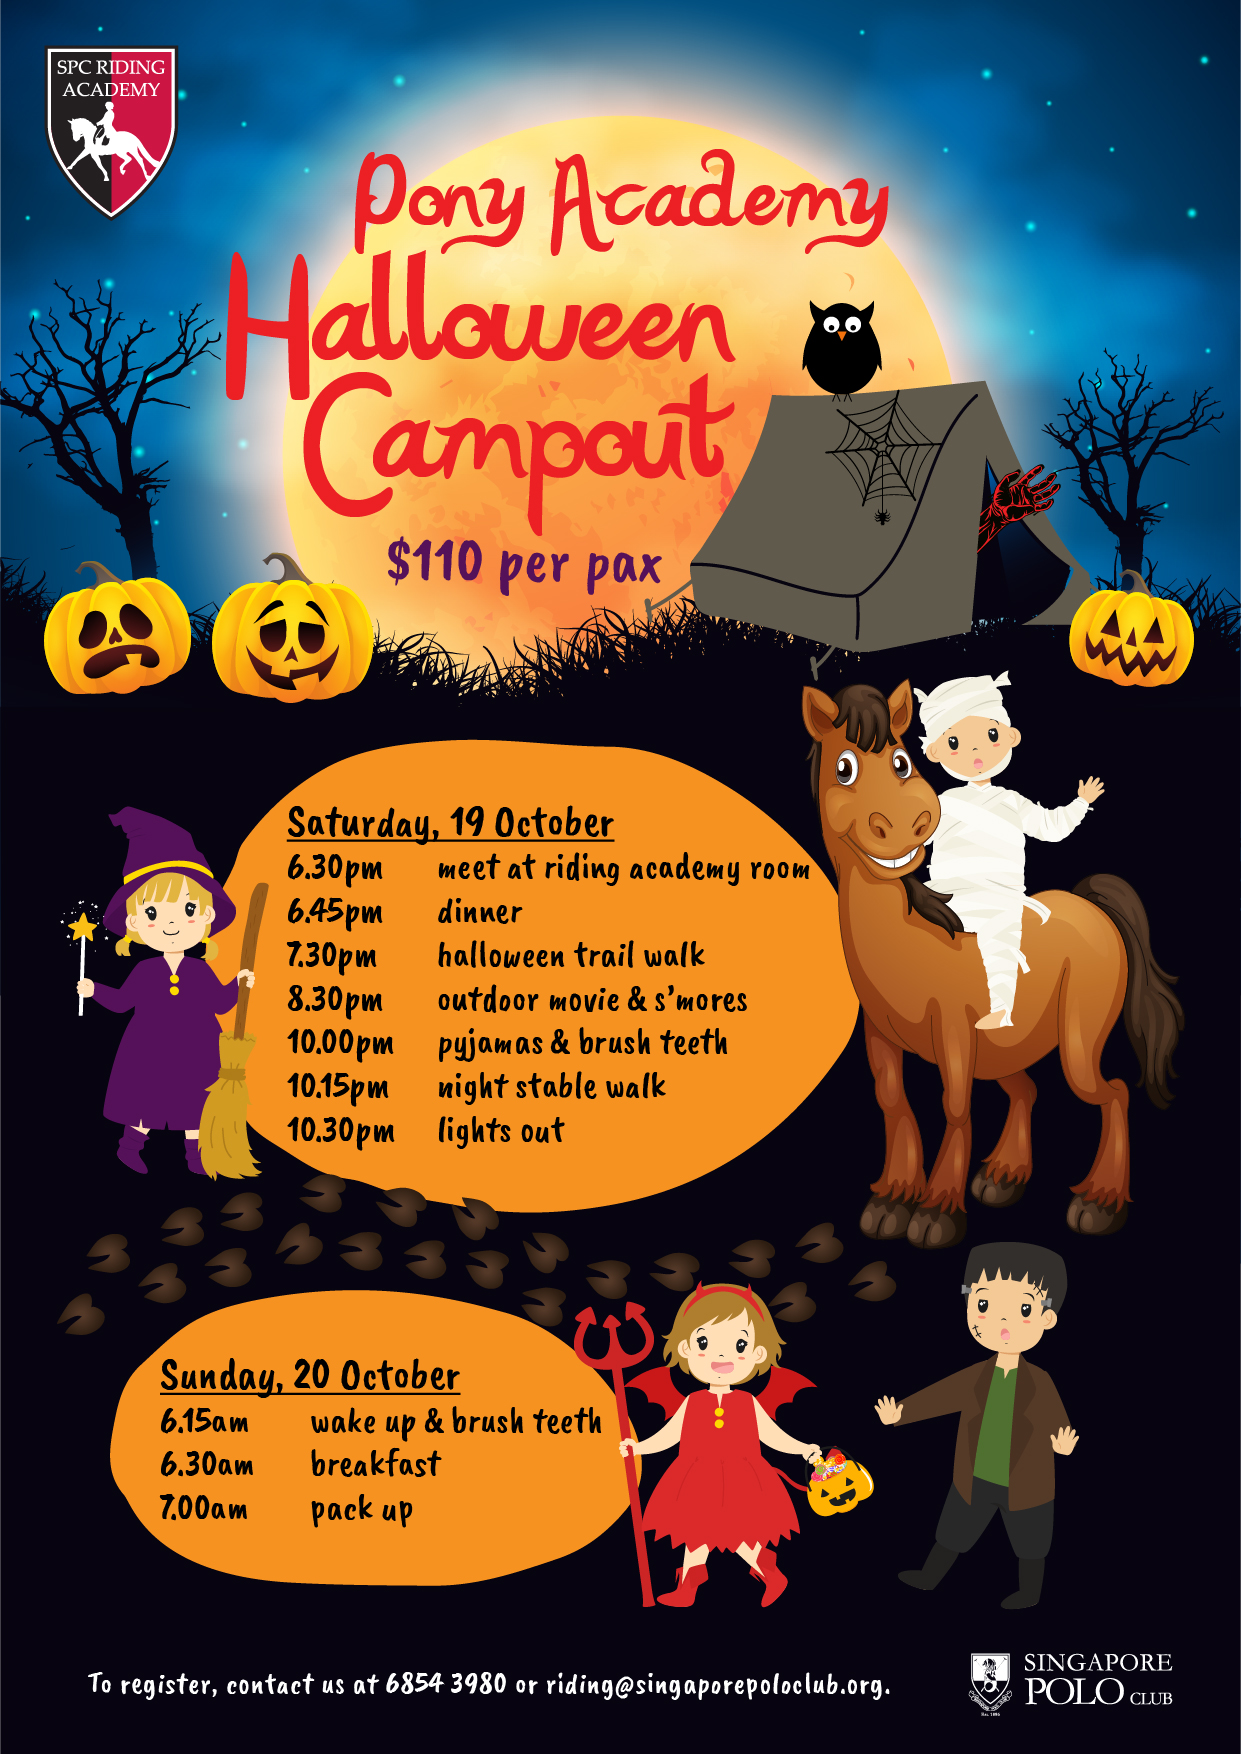 Pony Academy Halloween Campout